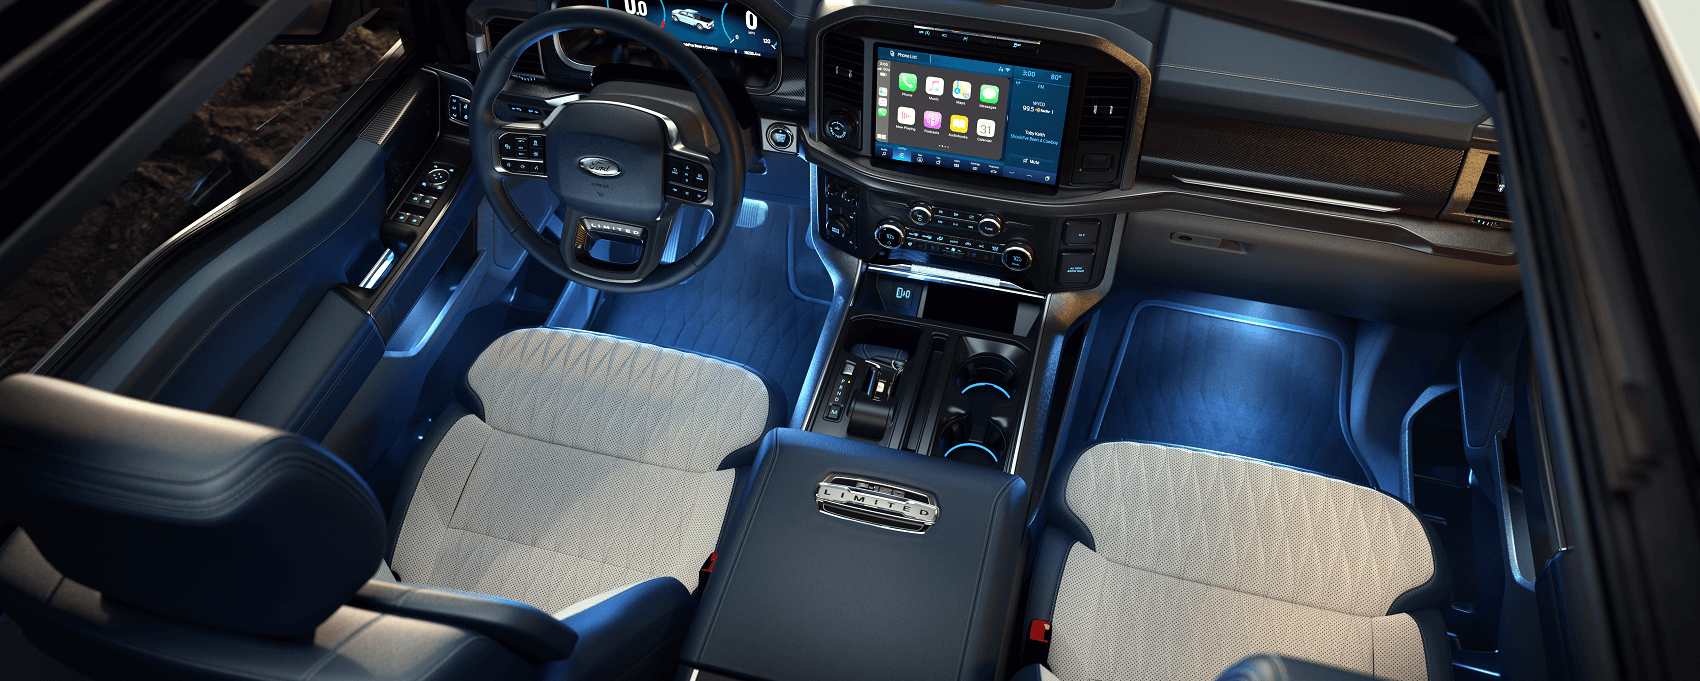 Birds eye view of interior of Ford F-150 